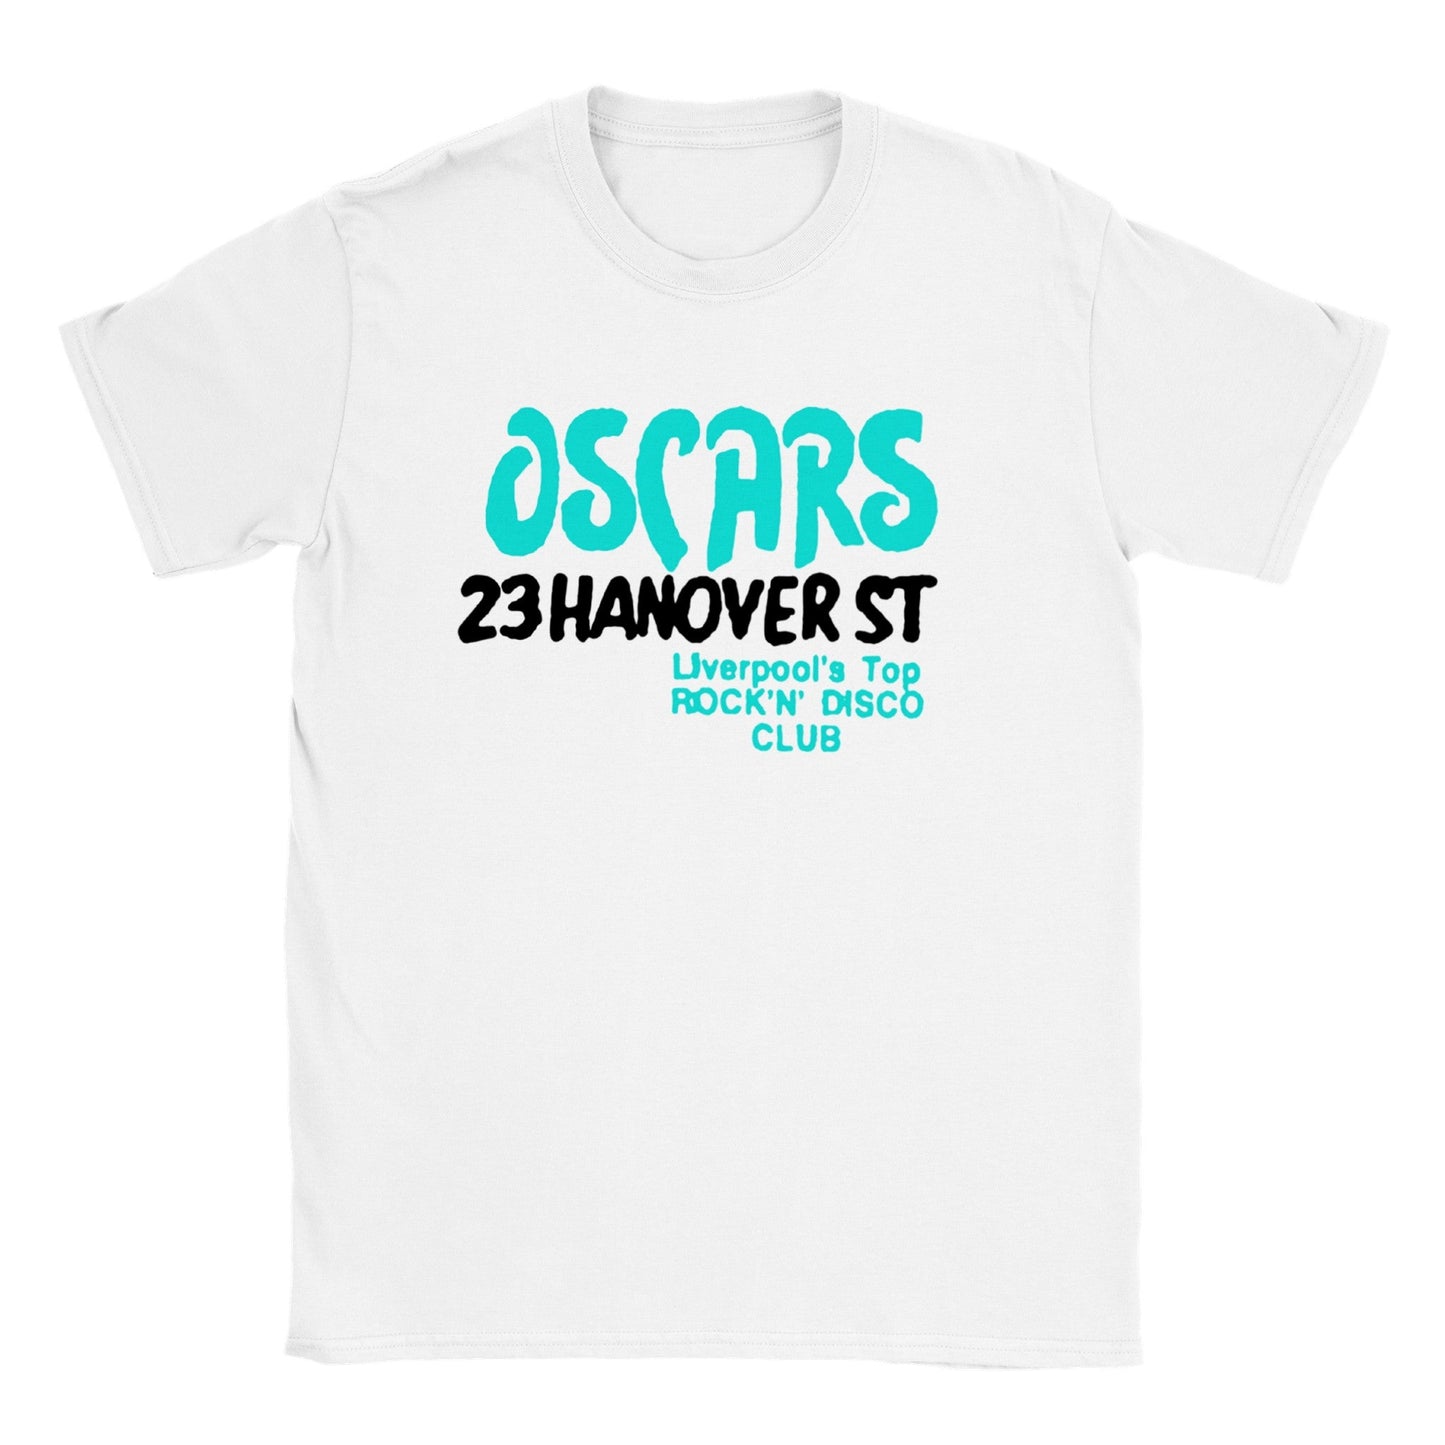 Oscars unisex T-shirt - various colours - Dirty Stop Outs